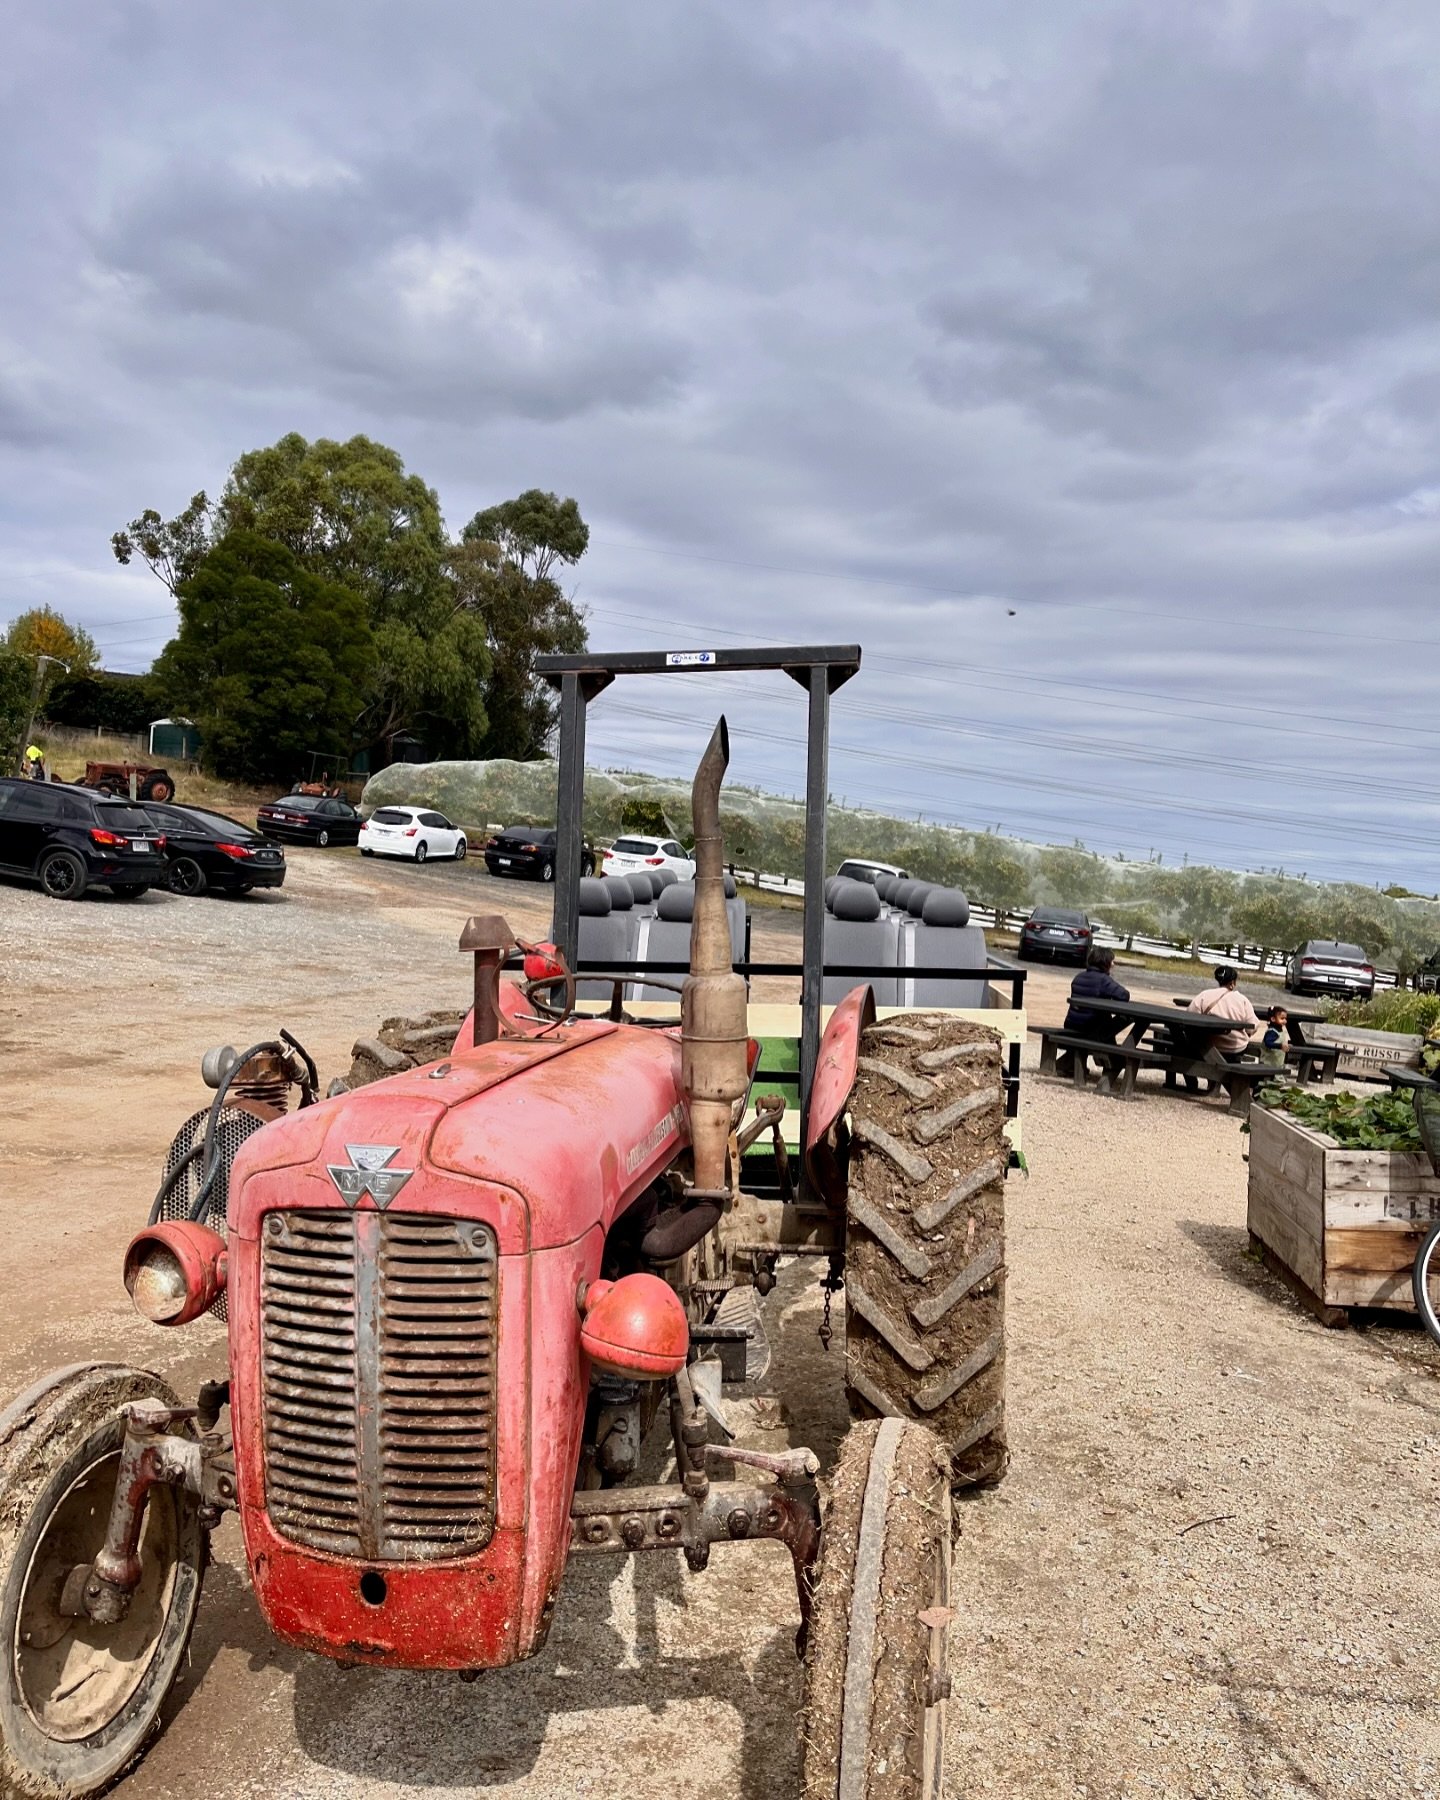 Who&rsquo;s joining us for a tractor ride in the sun this weekend ? 🌞
The weather is looking perfect for a tractor ride and some apple picking 🍎

Make sure to grab your You-Pick tickets from the link in our bio
We&rsquo;ve got Pink Lady&rsquo;s and